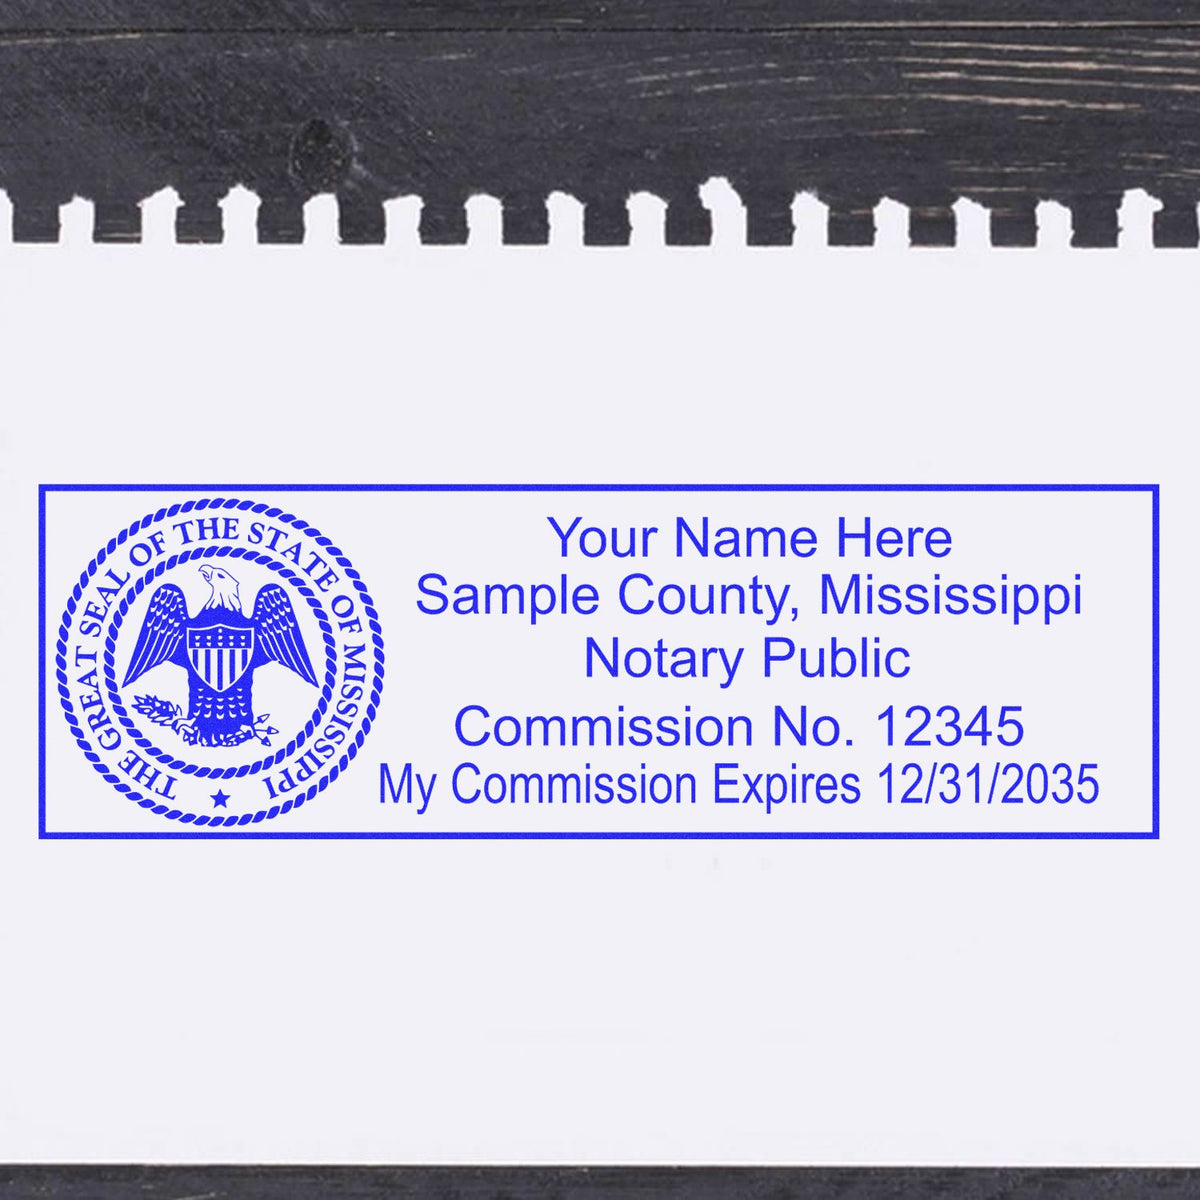 An alternative view of the Super Slim Mississippi Notary Public Stamp stamped on a sheet of paper showing the image in use